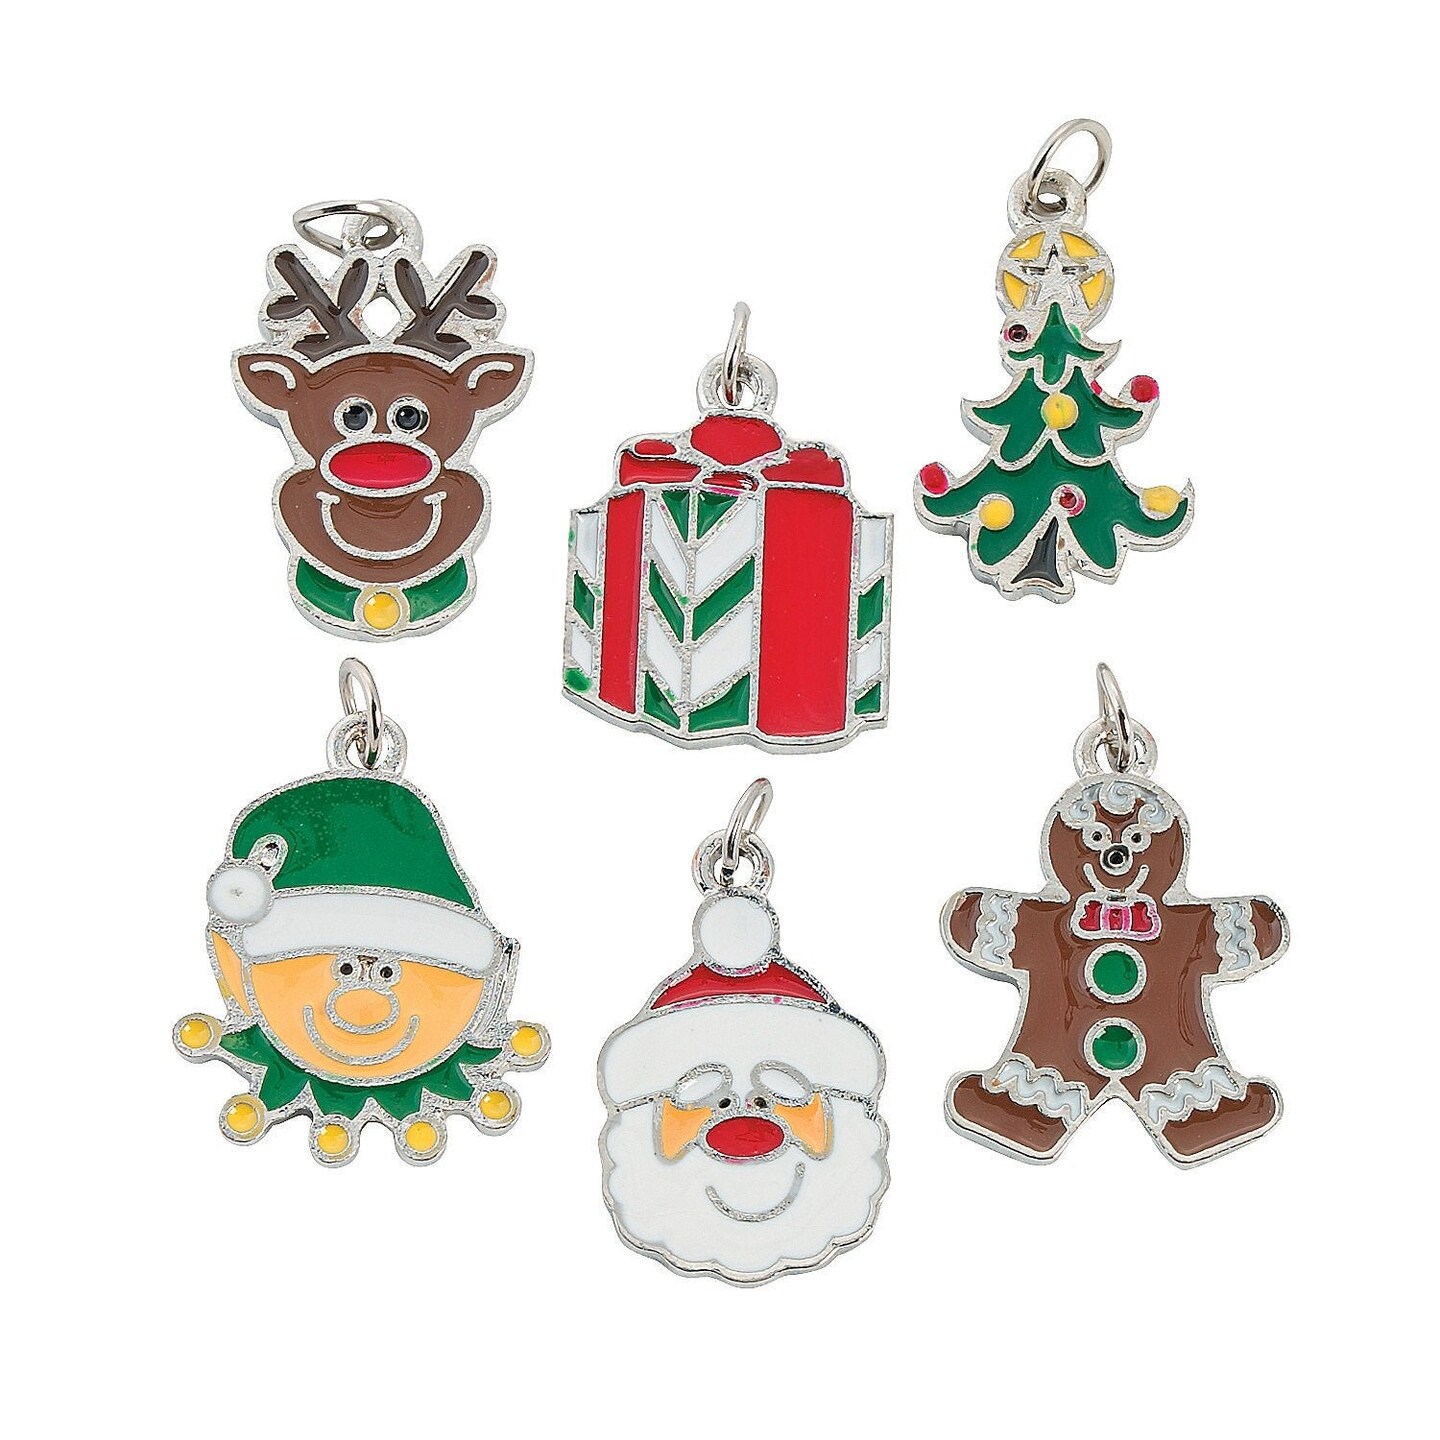 Happy Holidays Enamel Charms - Crafts for Kids and Fun Home Activities